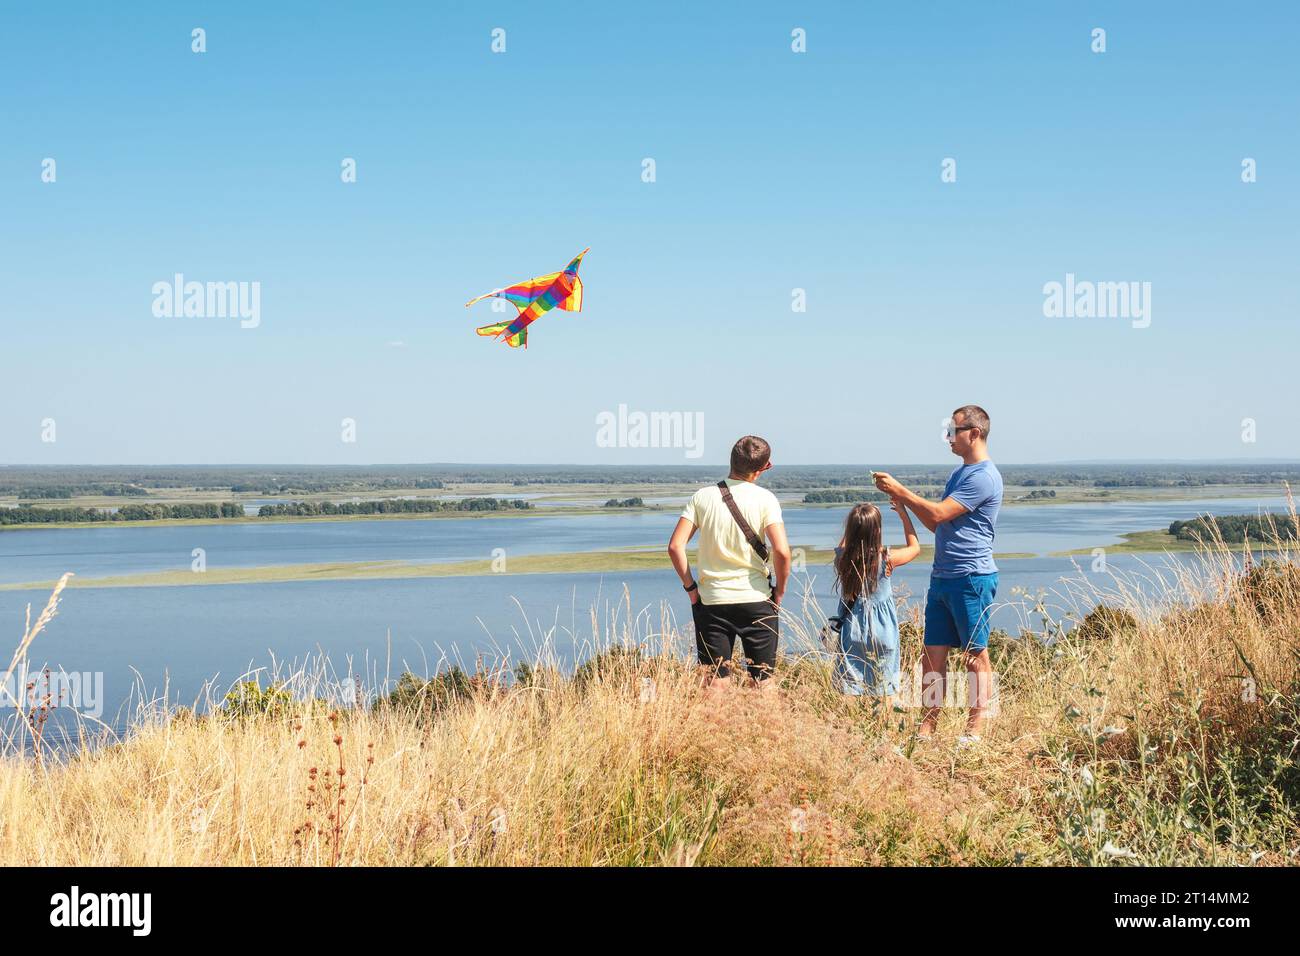 Family father, son, daughter fly a kite in nature. Stock Photo